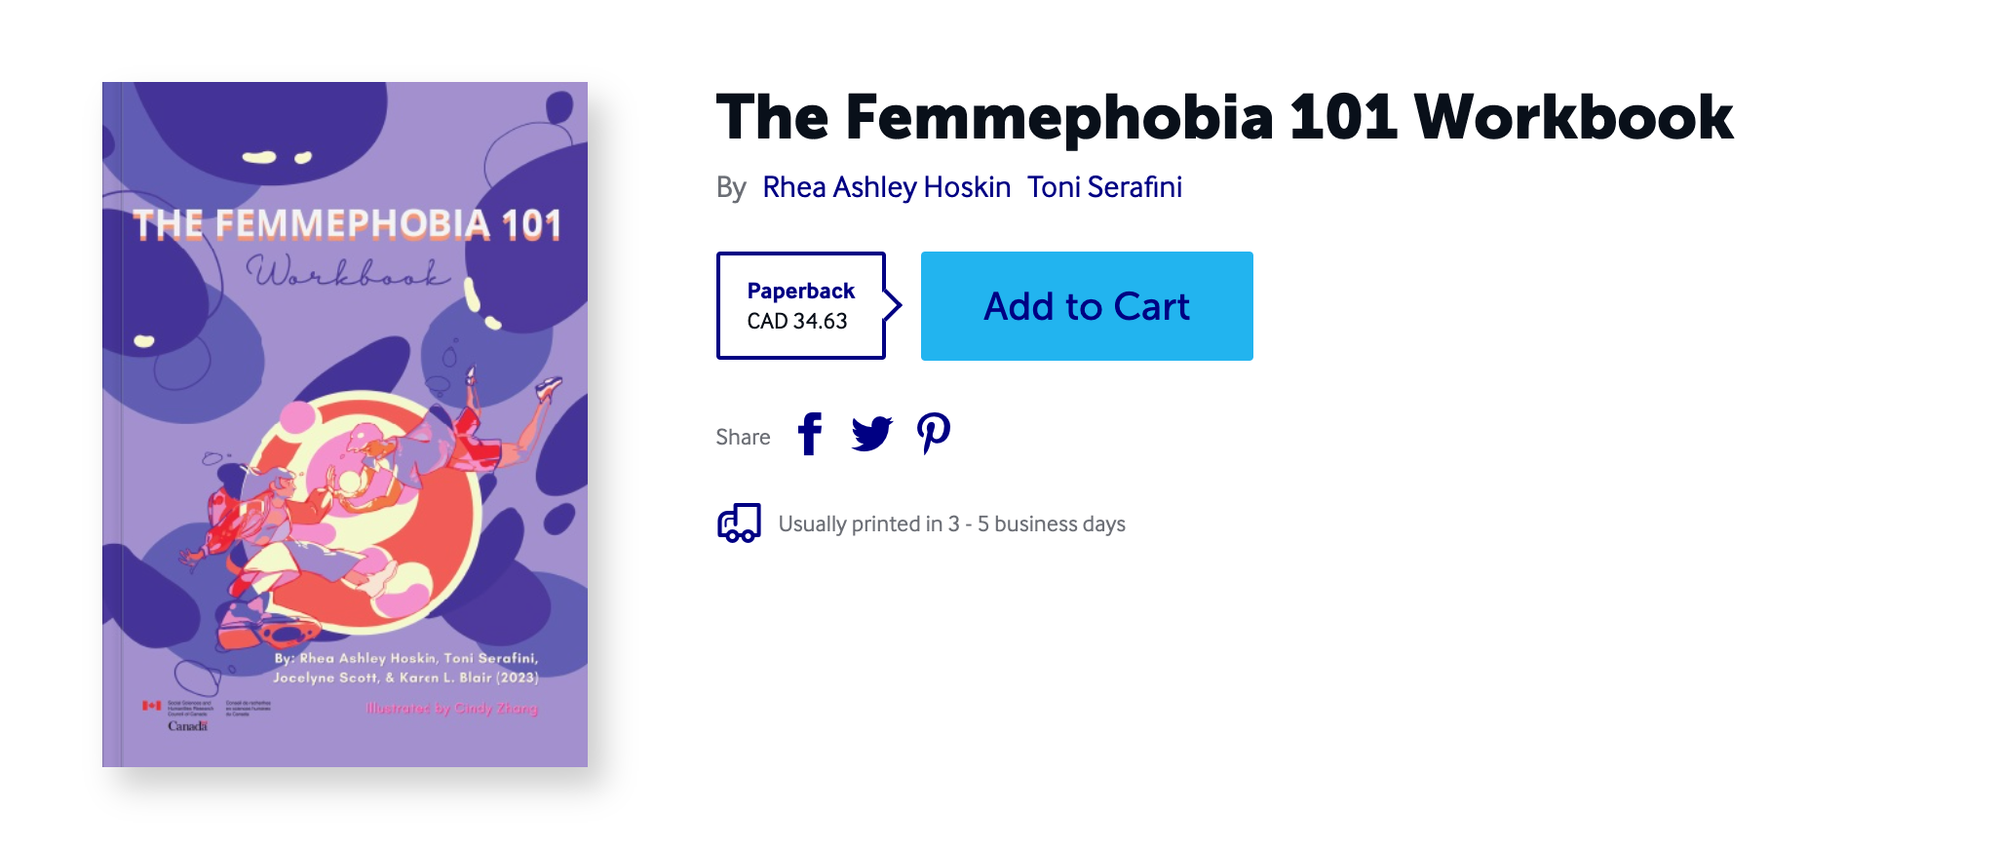 Click Here to purchase a copy of Femmephobia 101